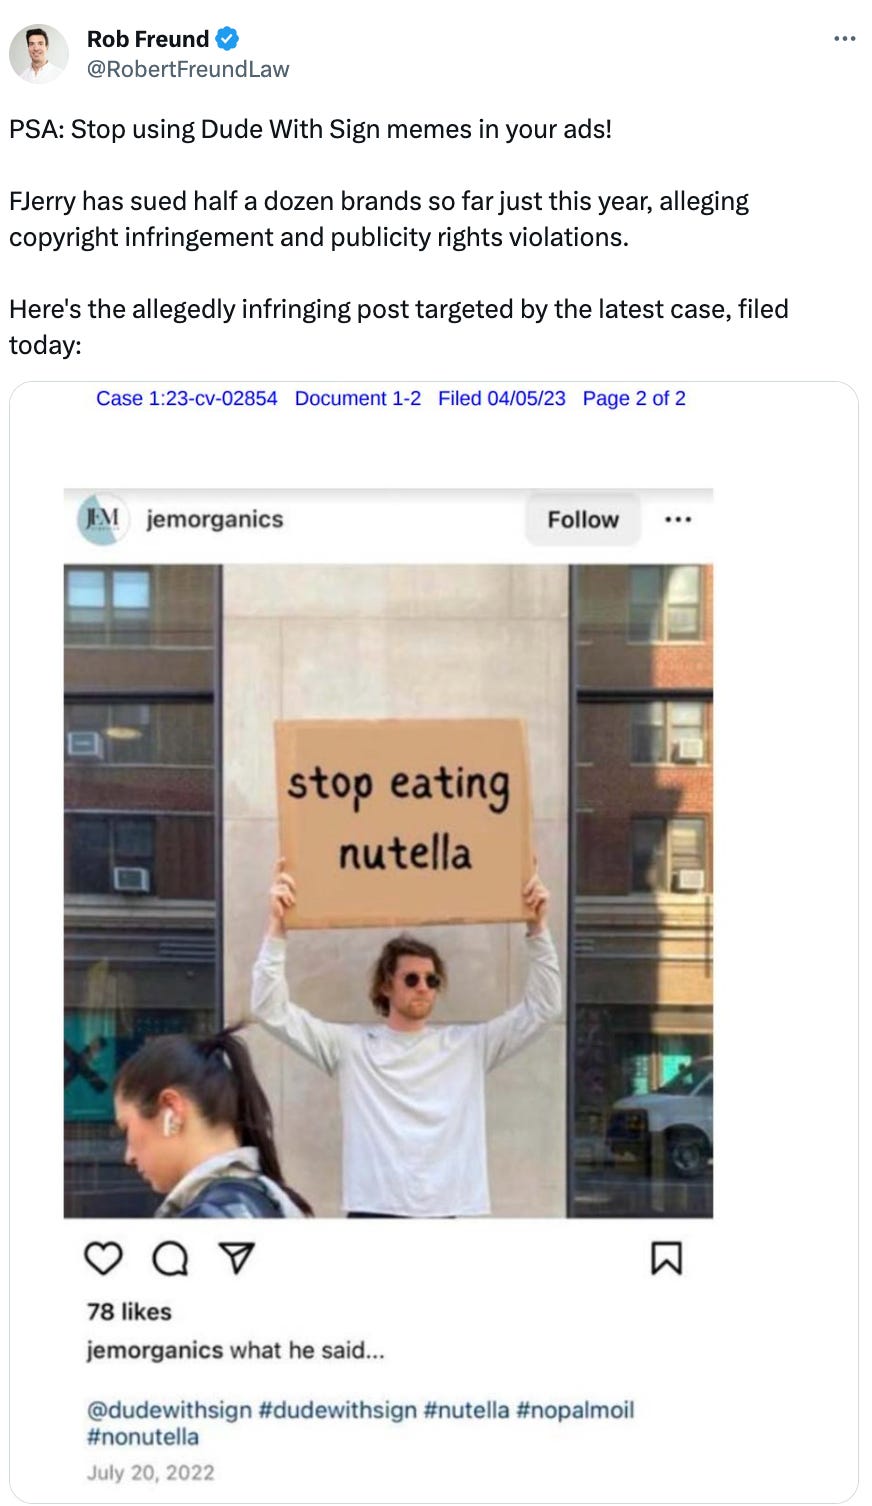 Tweet from Rob that says "PSA: Stop using Dude With Sign memes in your ads!   FJerry has sued half a dozen brands so far just this year, alleging copyright infringement and publicity rights violations.  Here's the allegedly infringing post targeted by the latest case, filed today:" he also includes an example of the brand photo in the lawsuit.